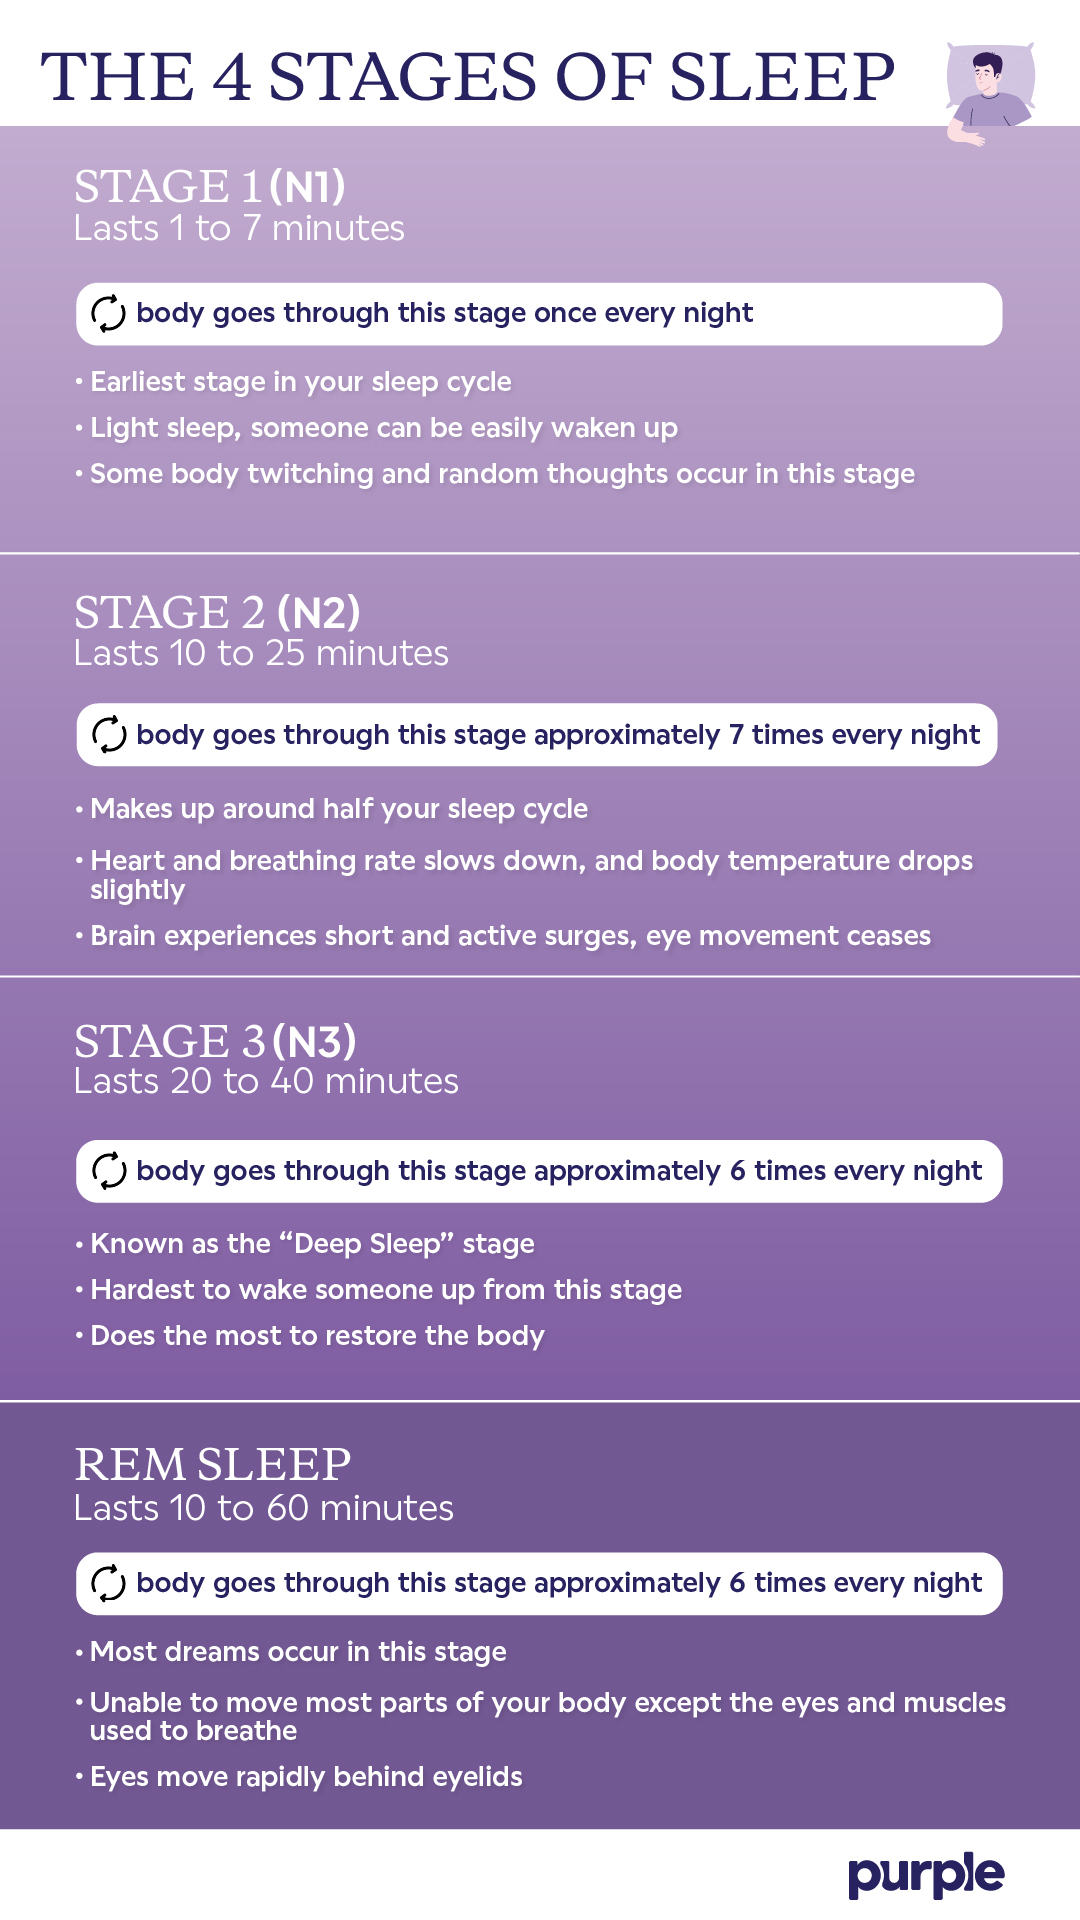 4 stages of sleep with descriptions